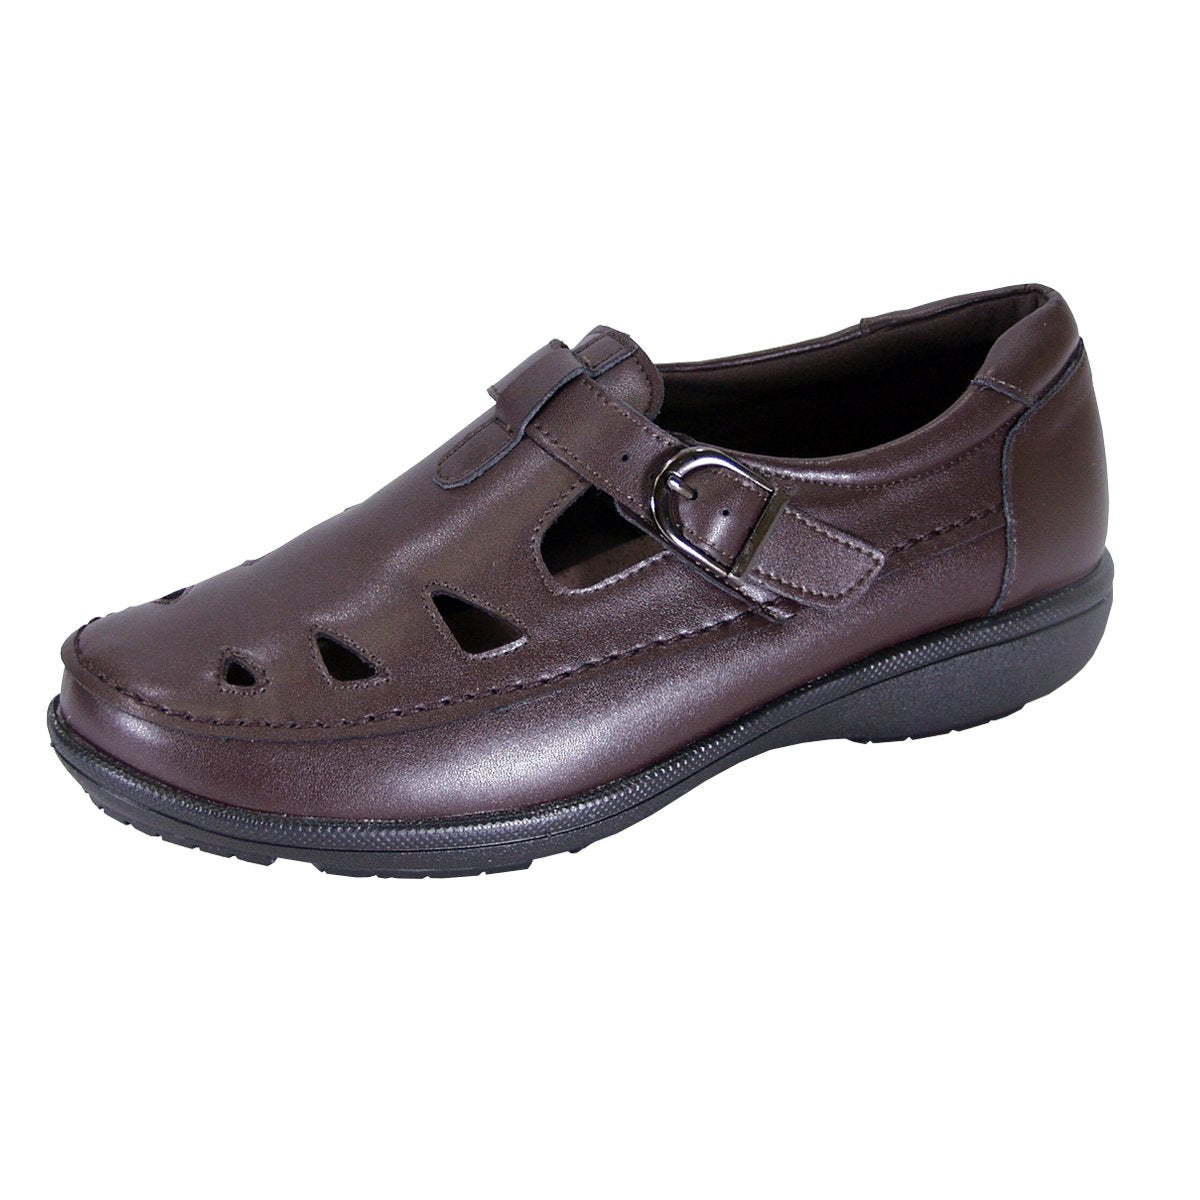 24 HOUR COMFORT Annette Women's Wide Width Leather Loafers